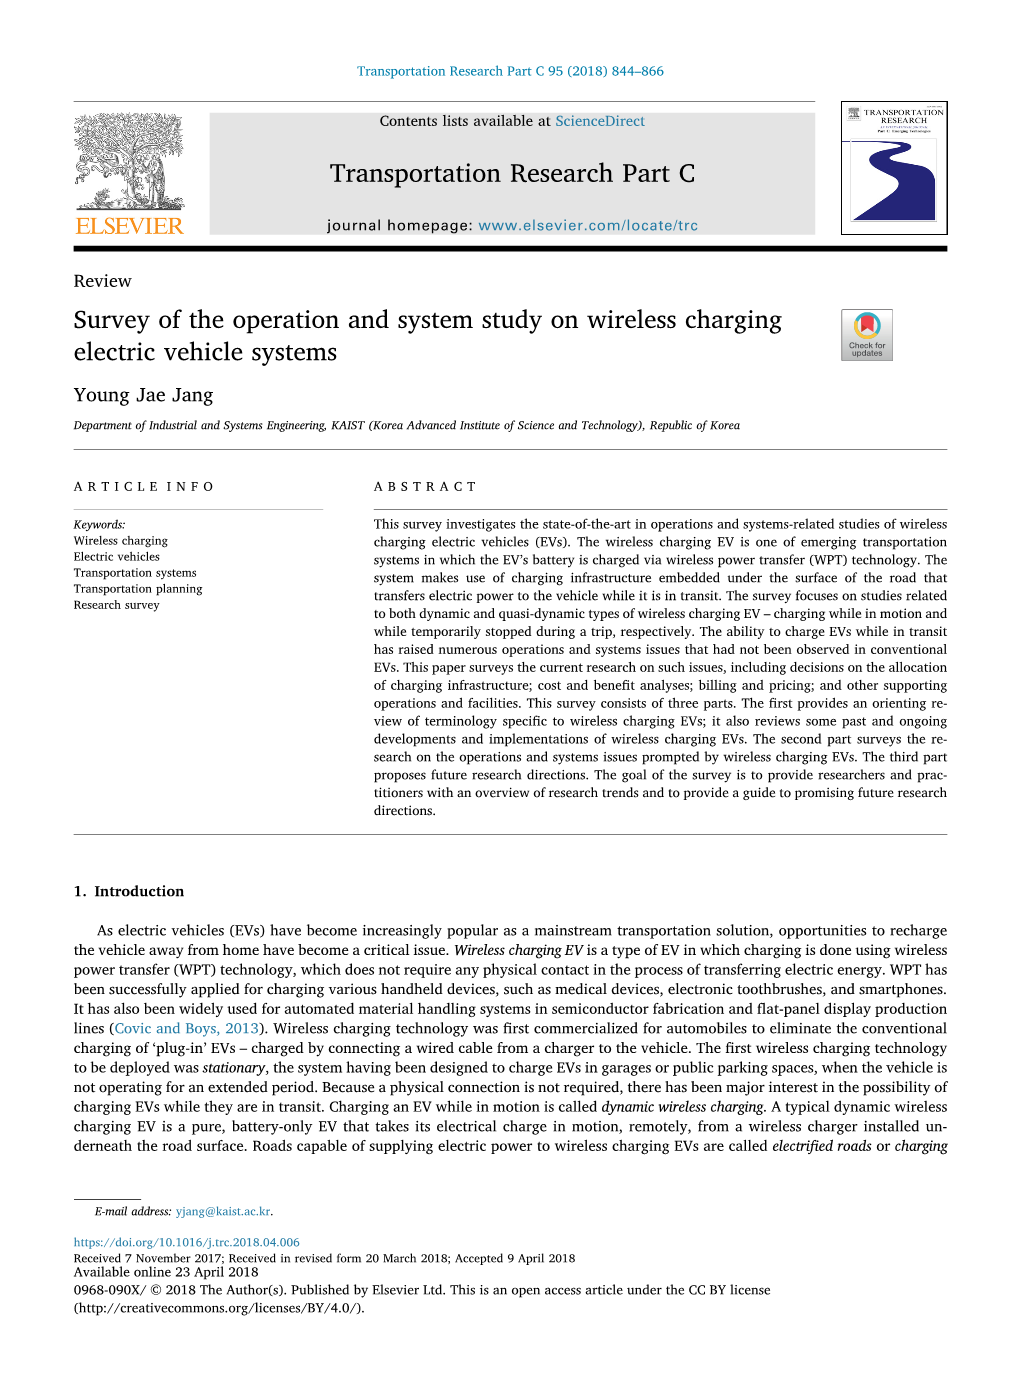 Survey of the Operation and System Study on Wireless Charging Electric Vehicle Systems T